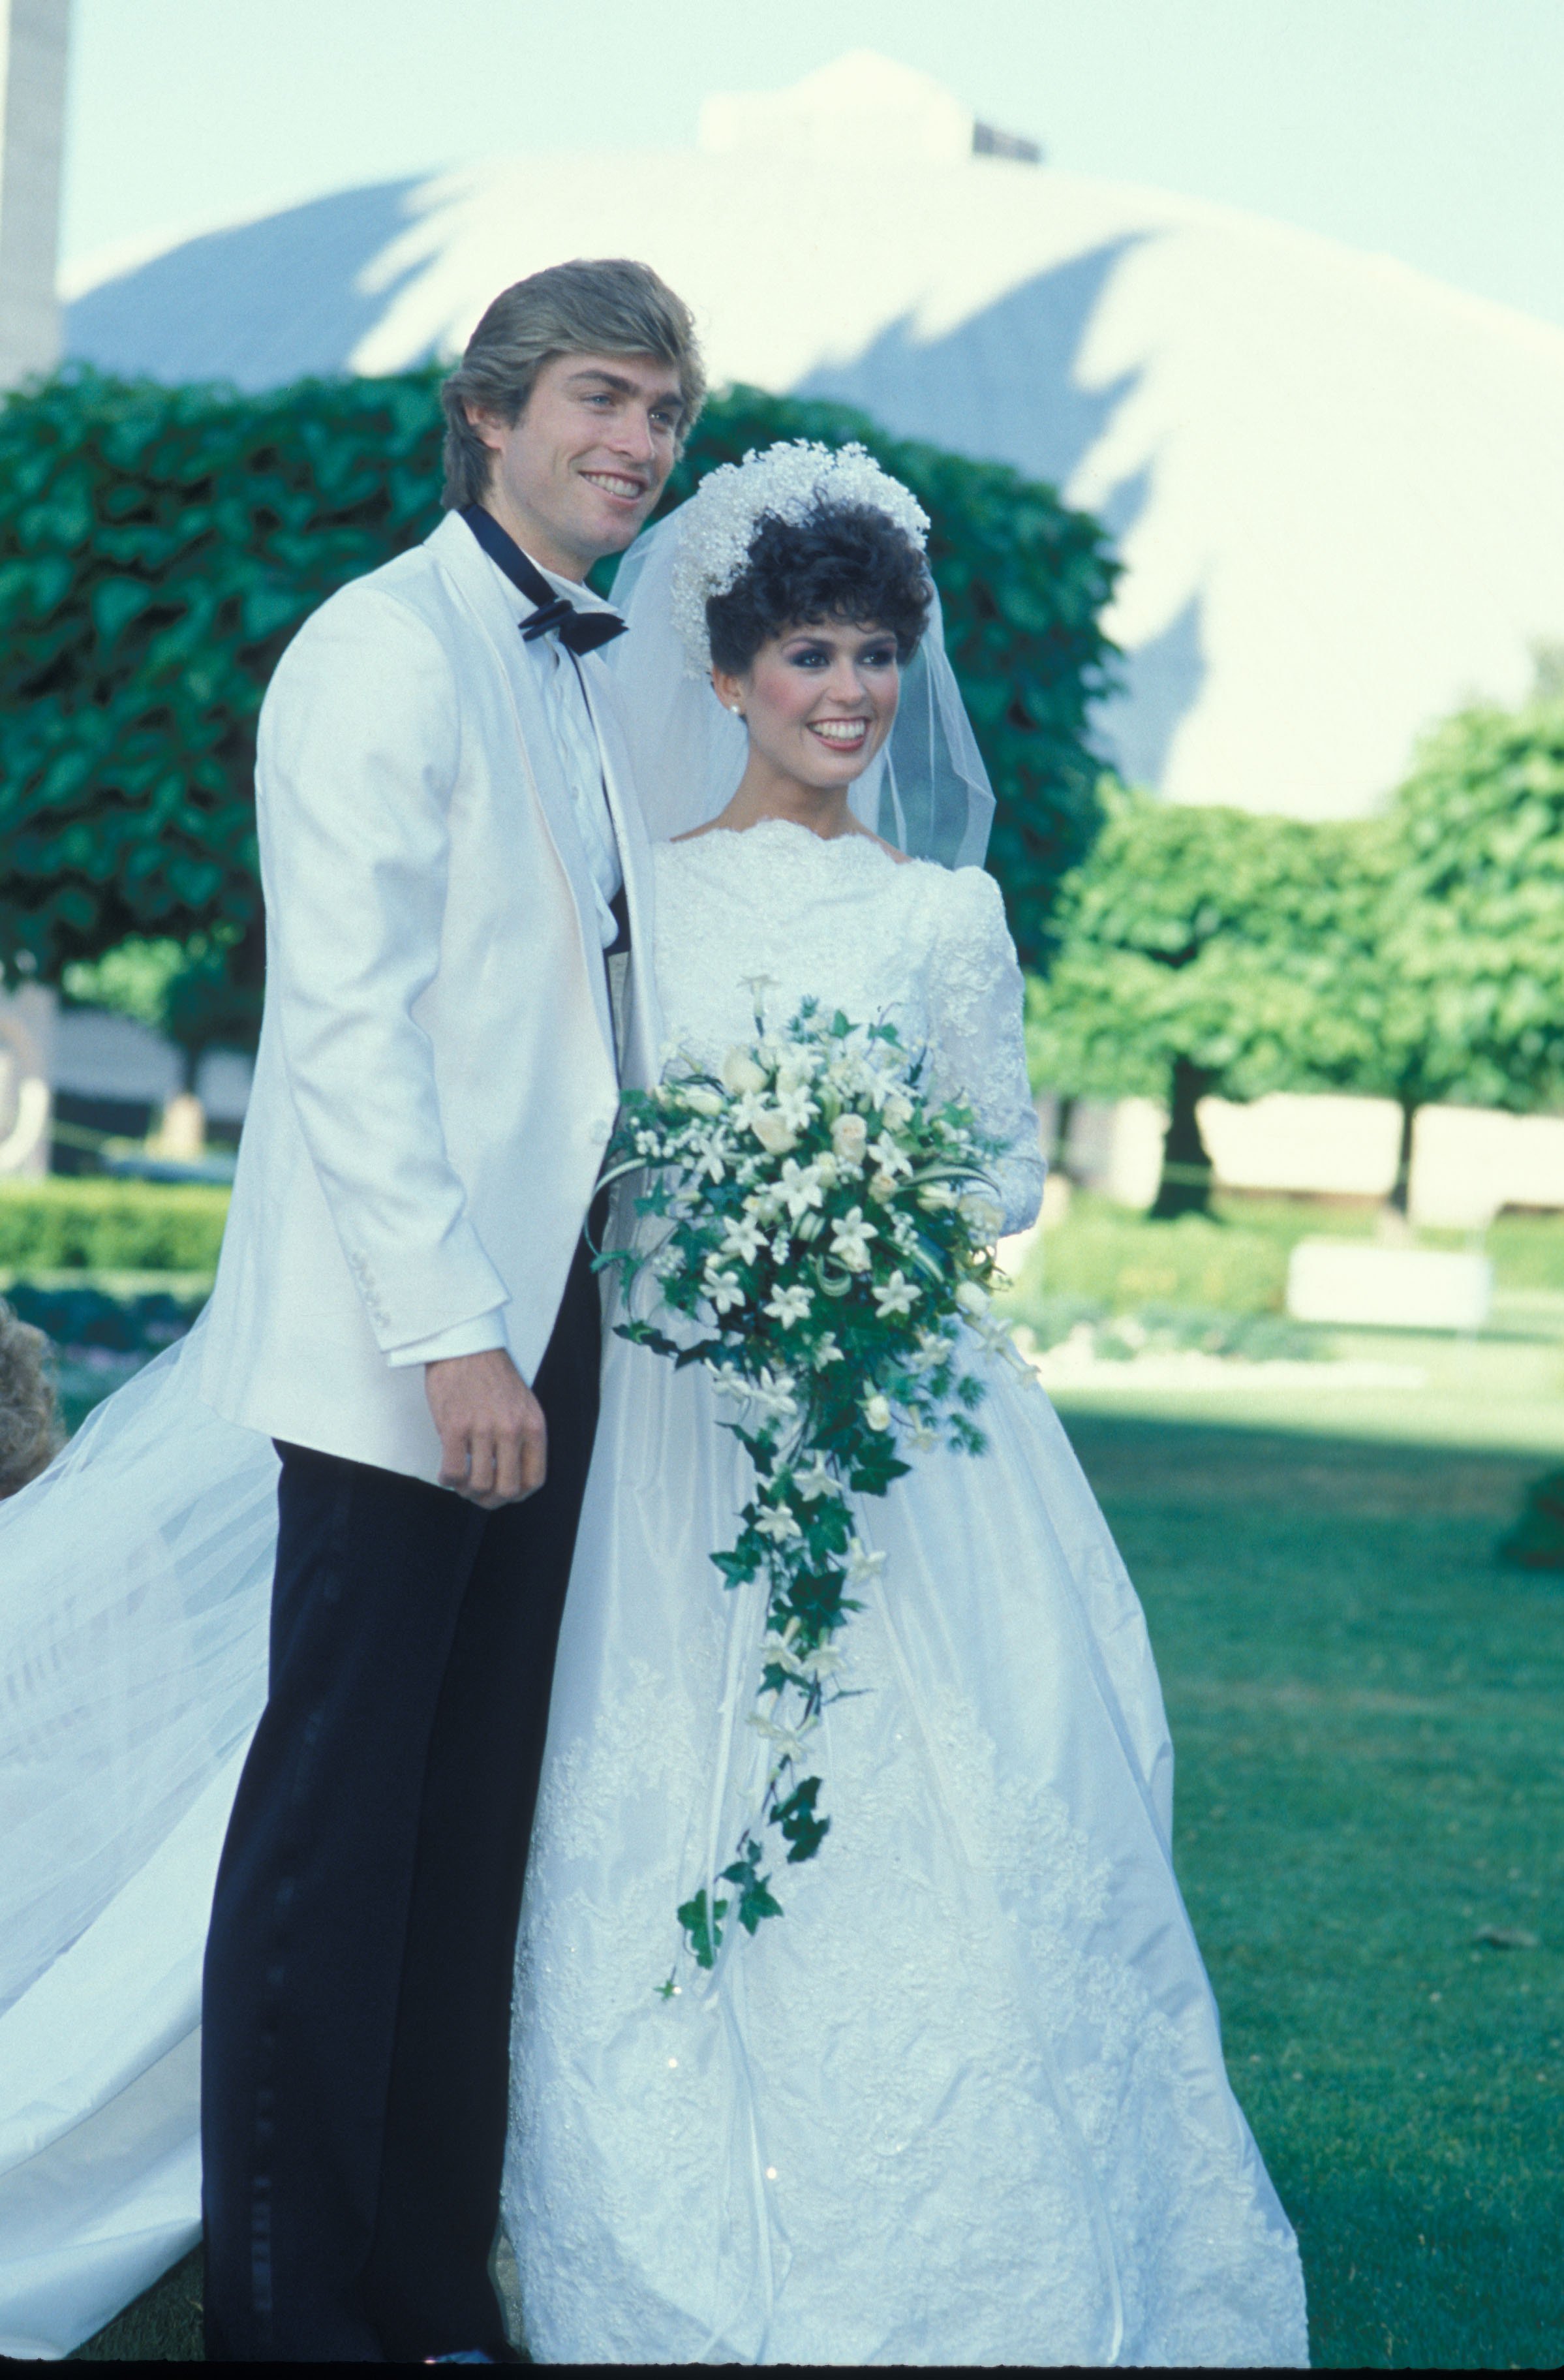 Stephen Lyle Craig and Marie Osmond at their first wedding on June 26, 1982, in Salt Lake City | Source: Getty Images